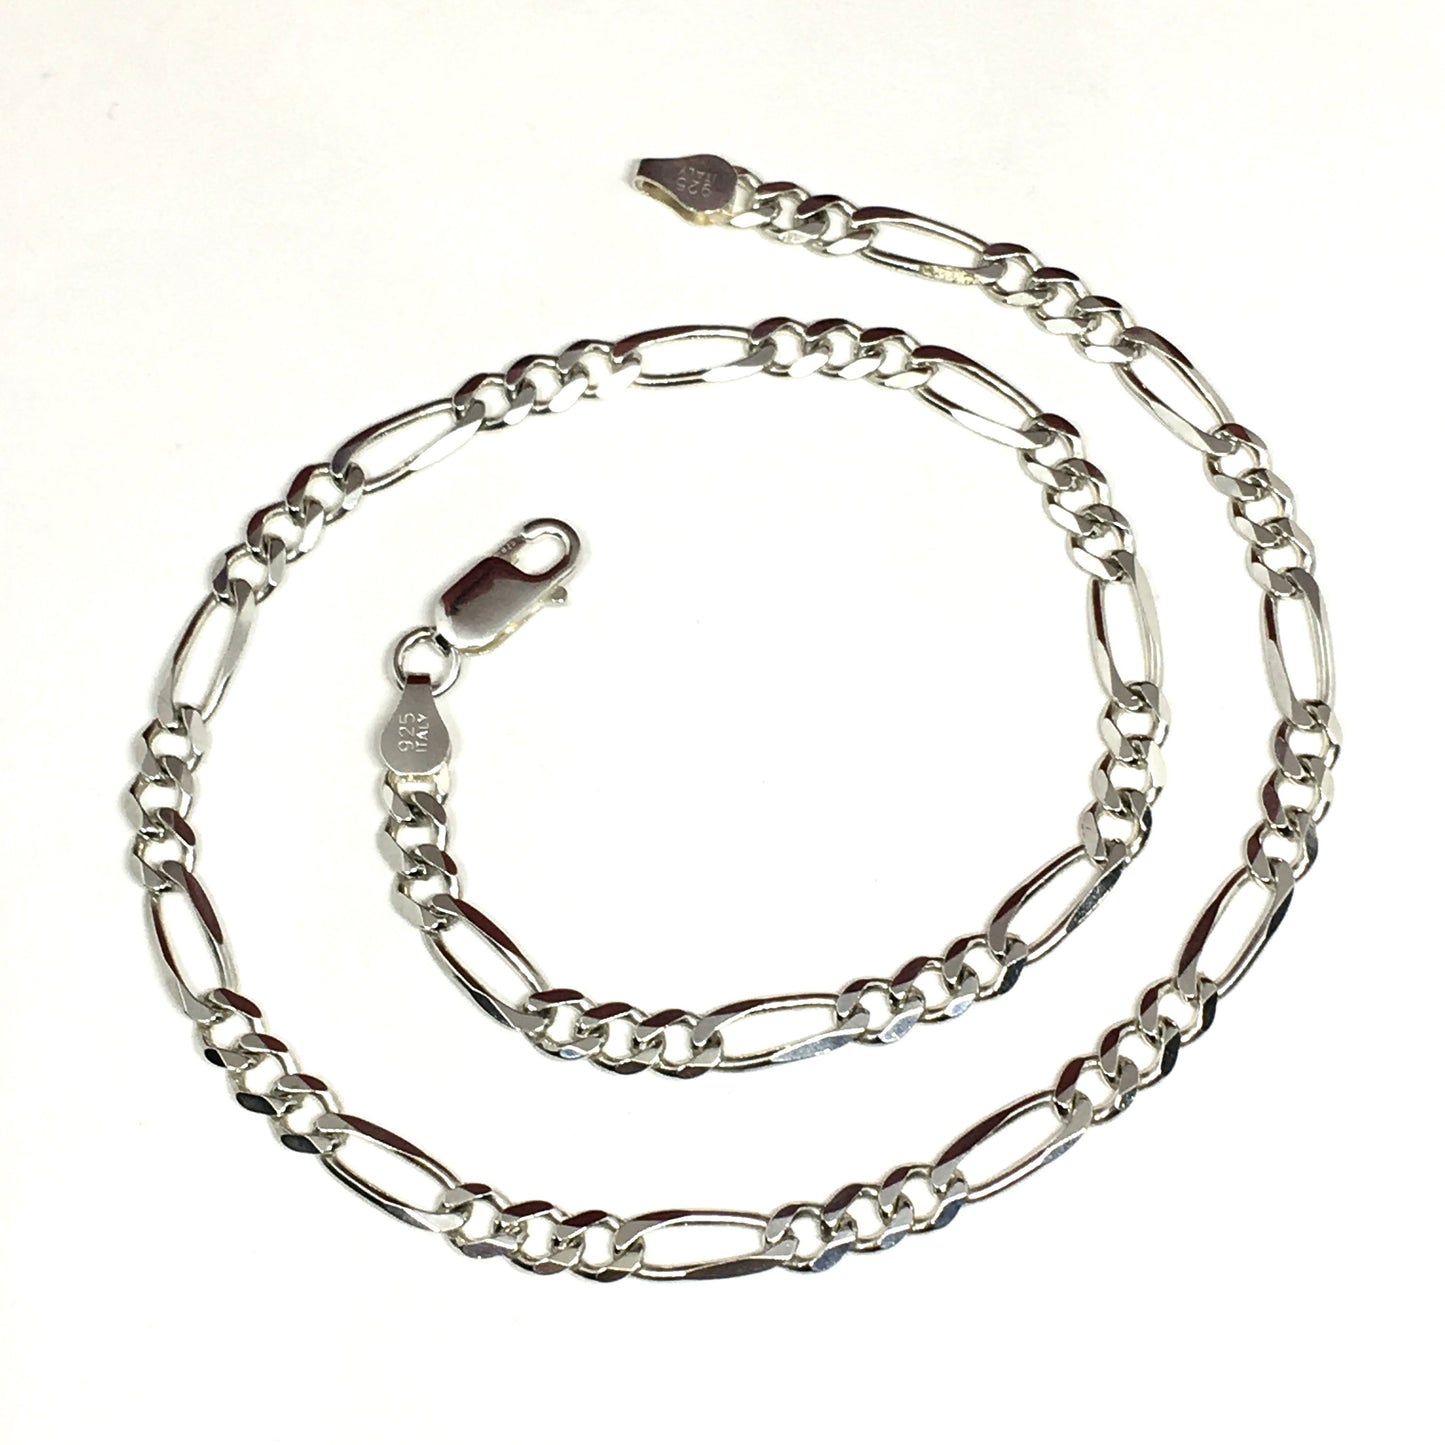 Silver Chain Necklace - 16" Sterling Silver 5mm Figaro Chain Necklace